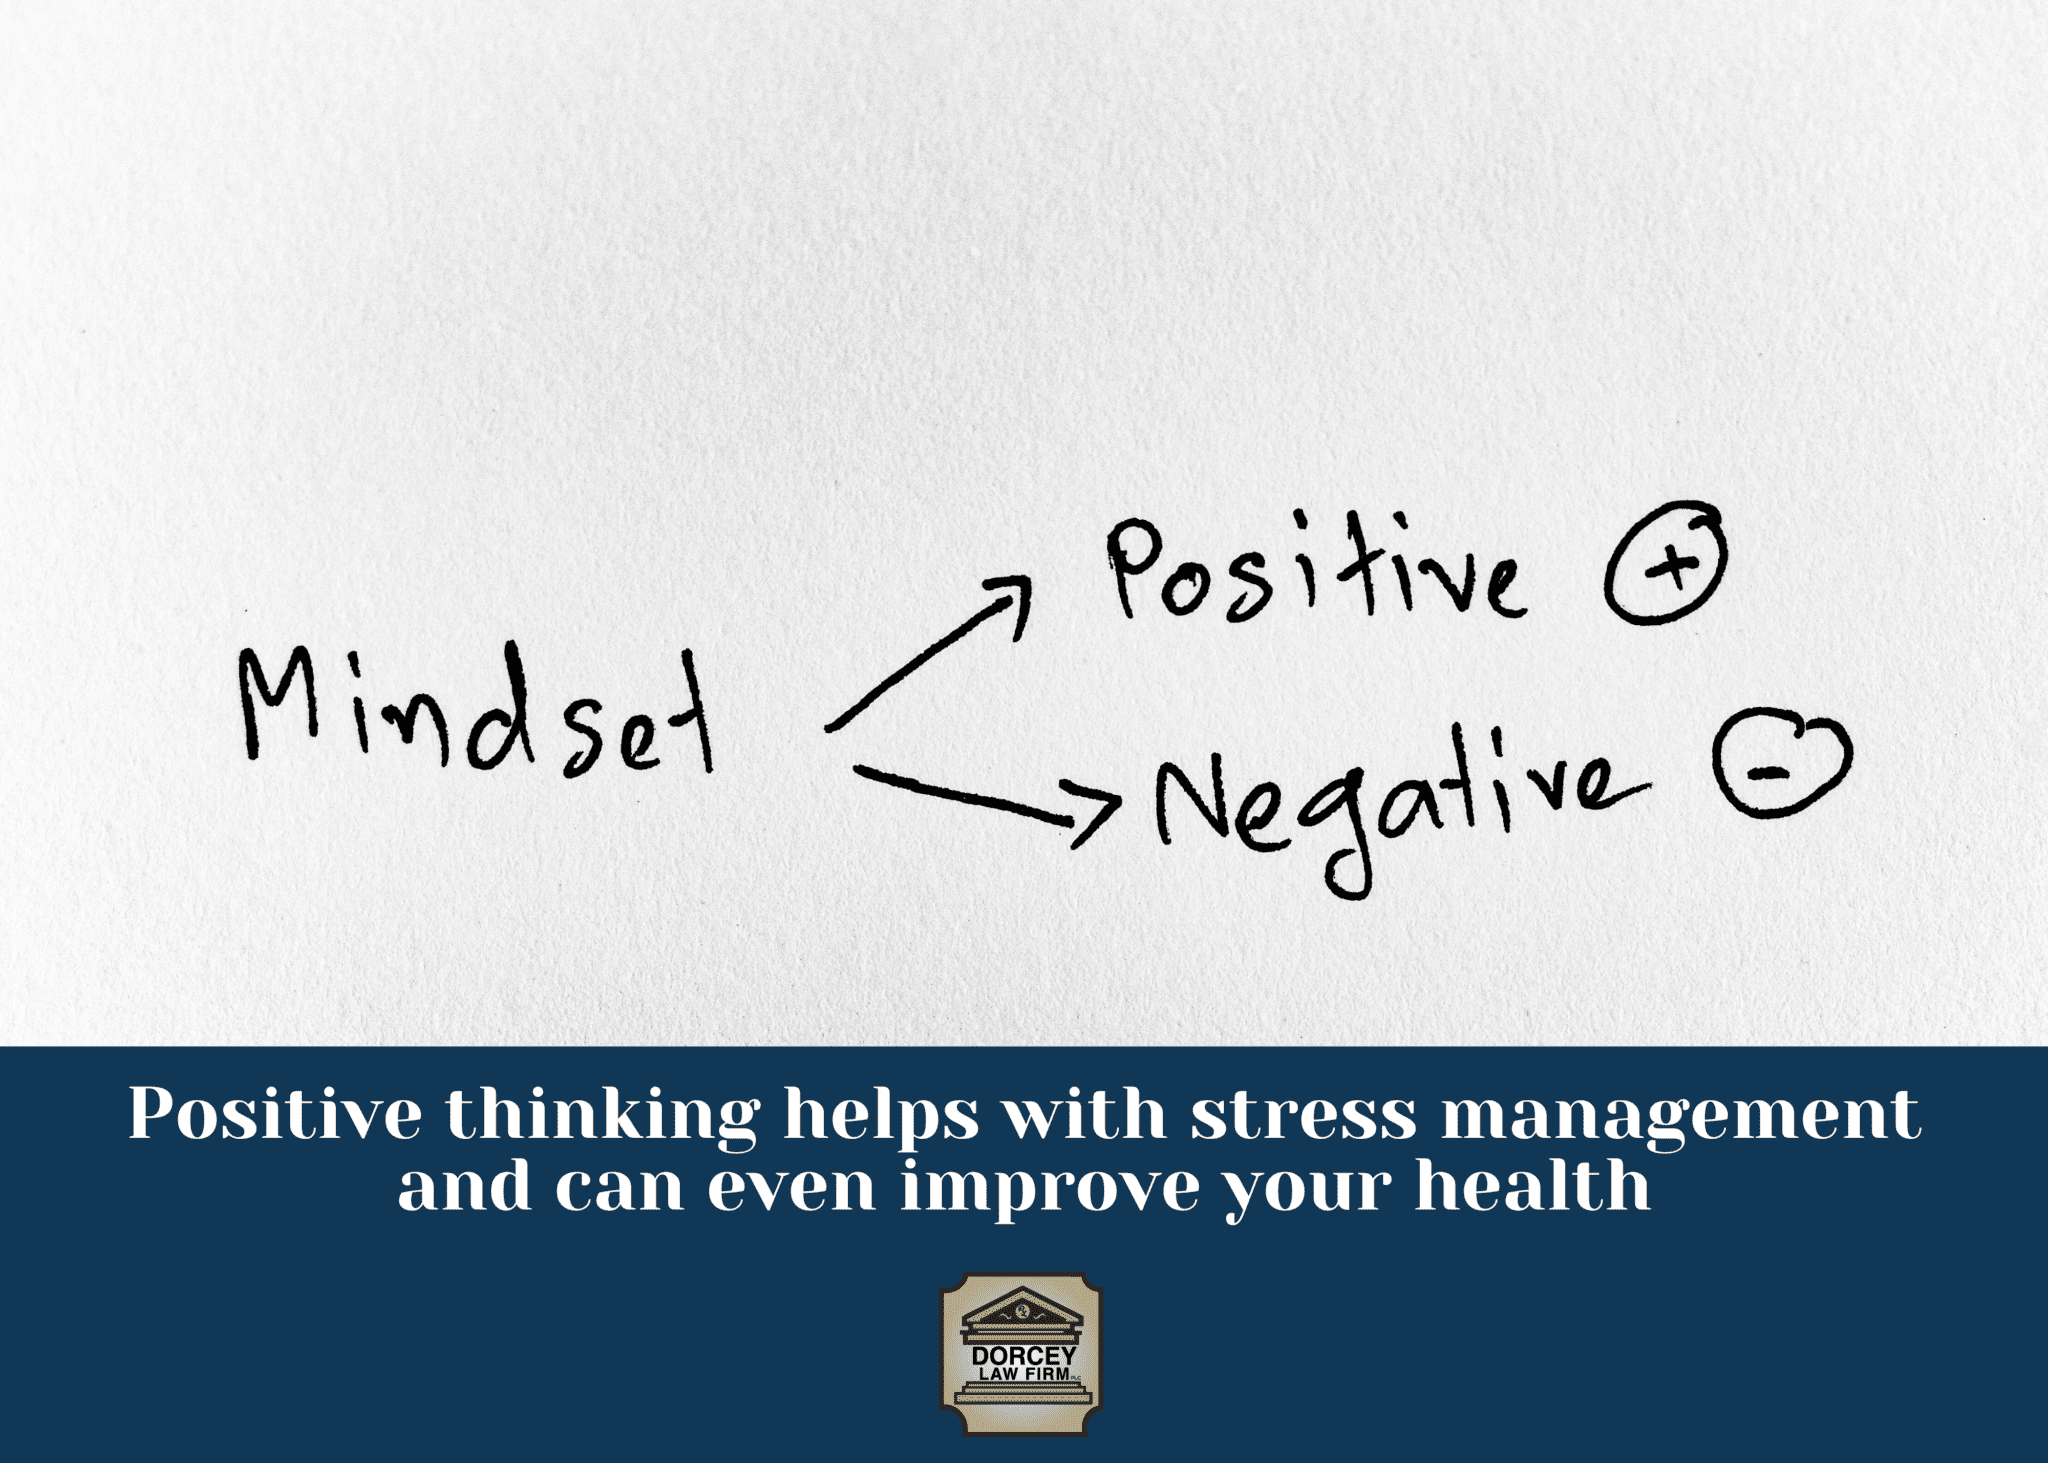 Positive Thinking Helps with Stress Management and Can Even Improve Your Health